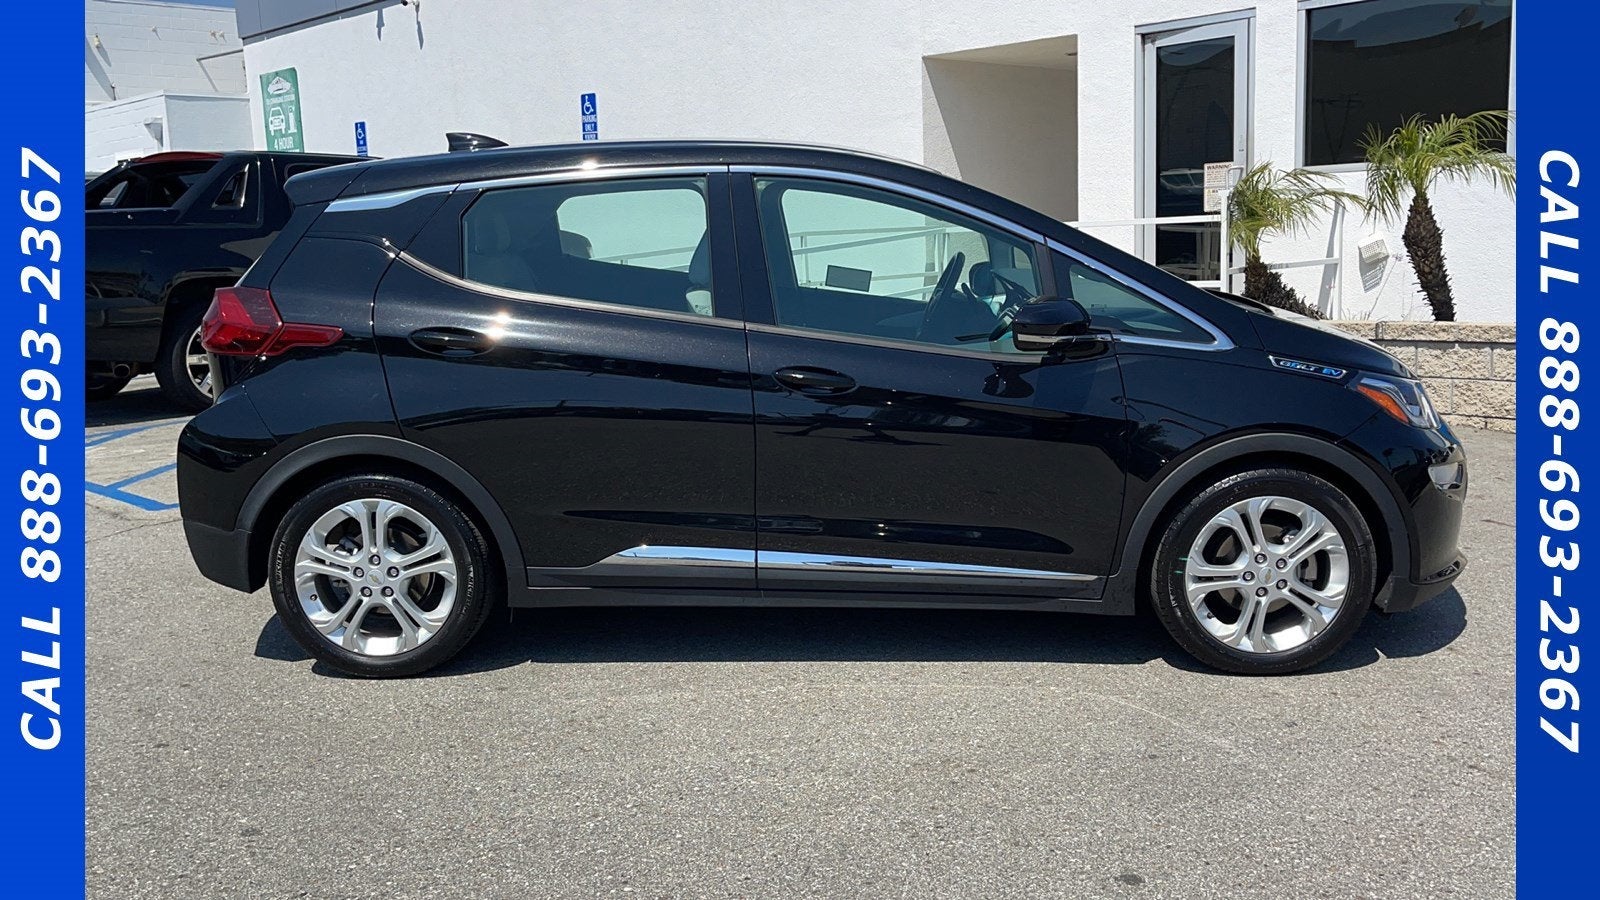 Used 2020 Chevrolet Bolt EV LT with VIN 1G1FY6S07L4148770 for sale in Upland, CA